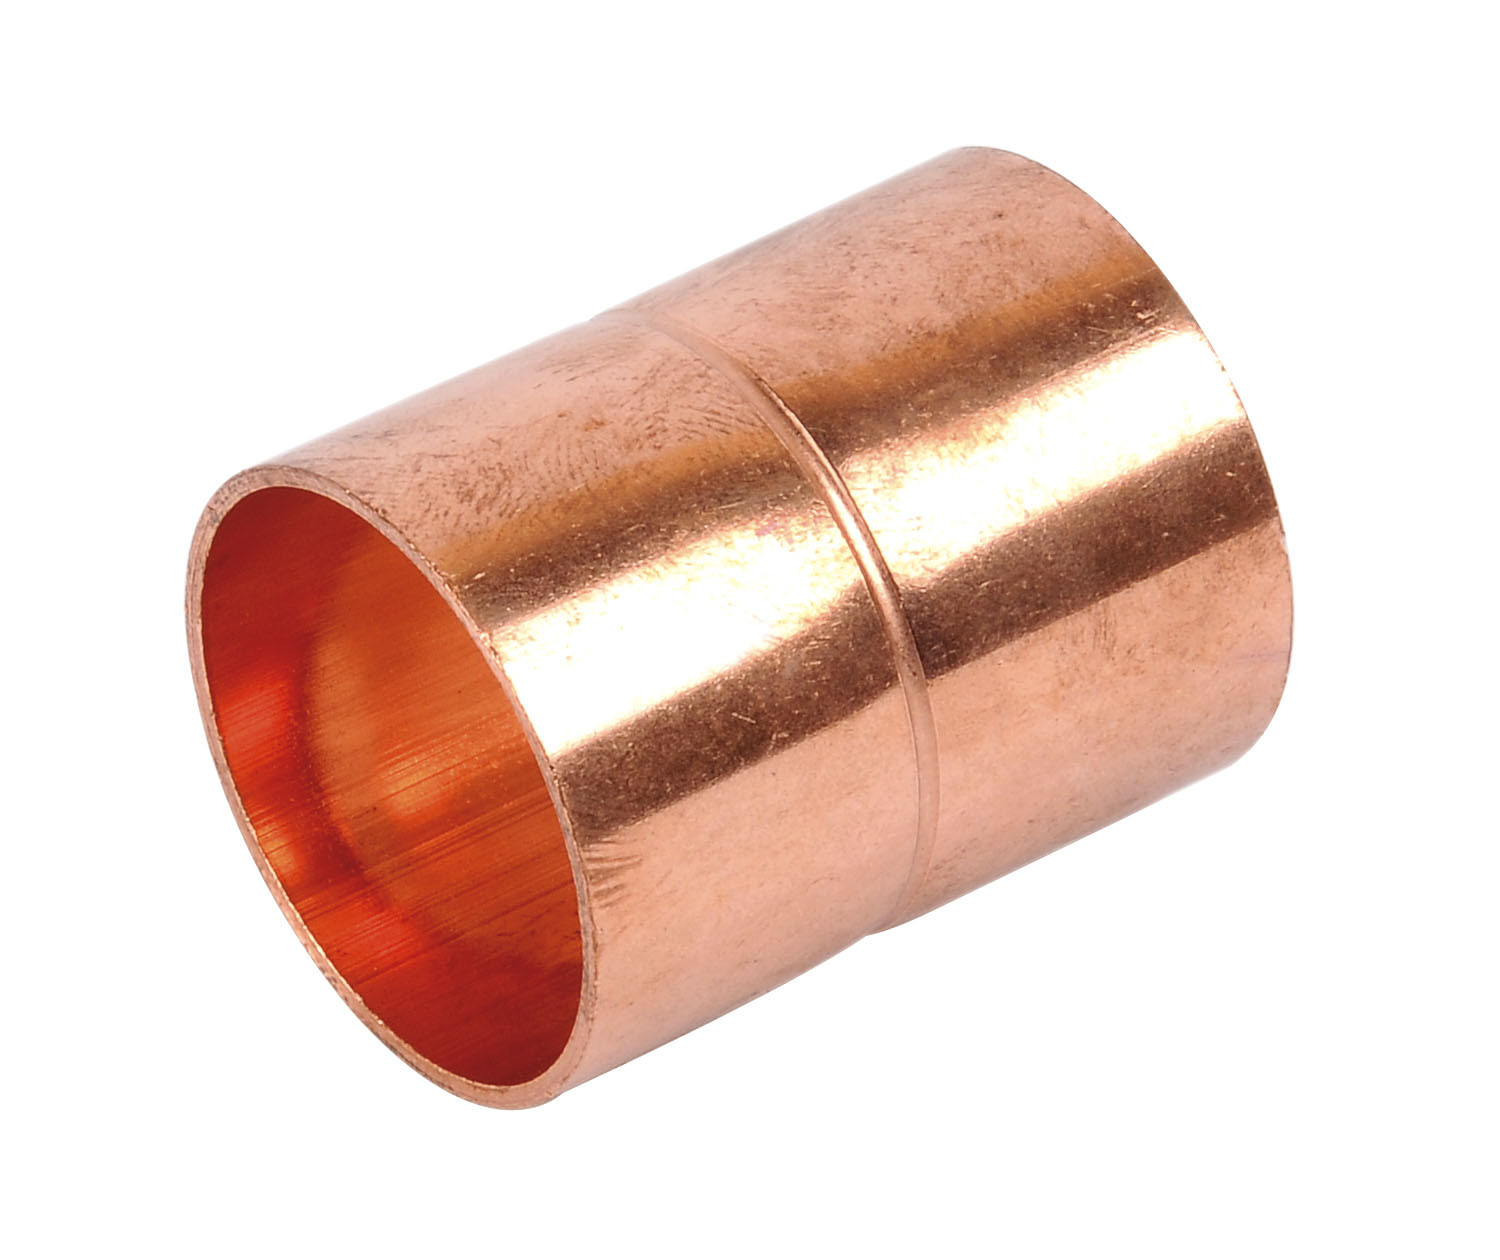 Copper fitting Reducing Coupling, Coupling - Reducer C X C, For refrigeration